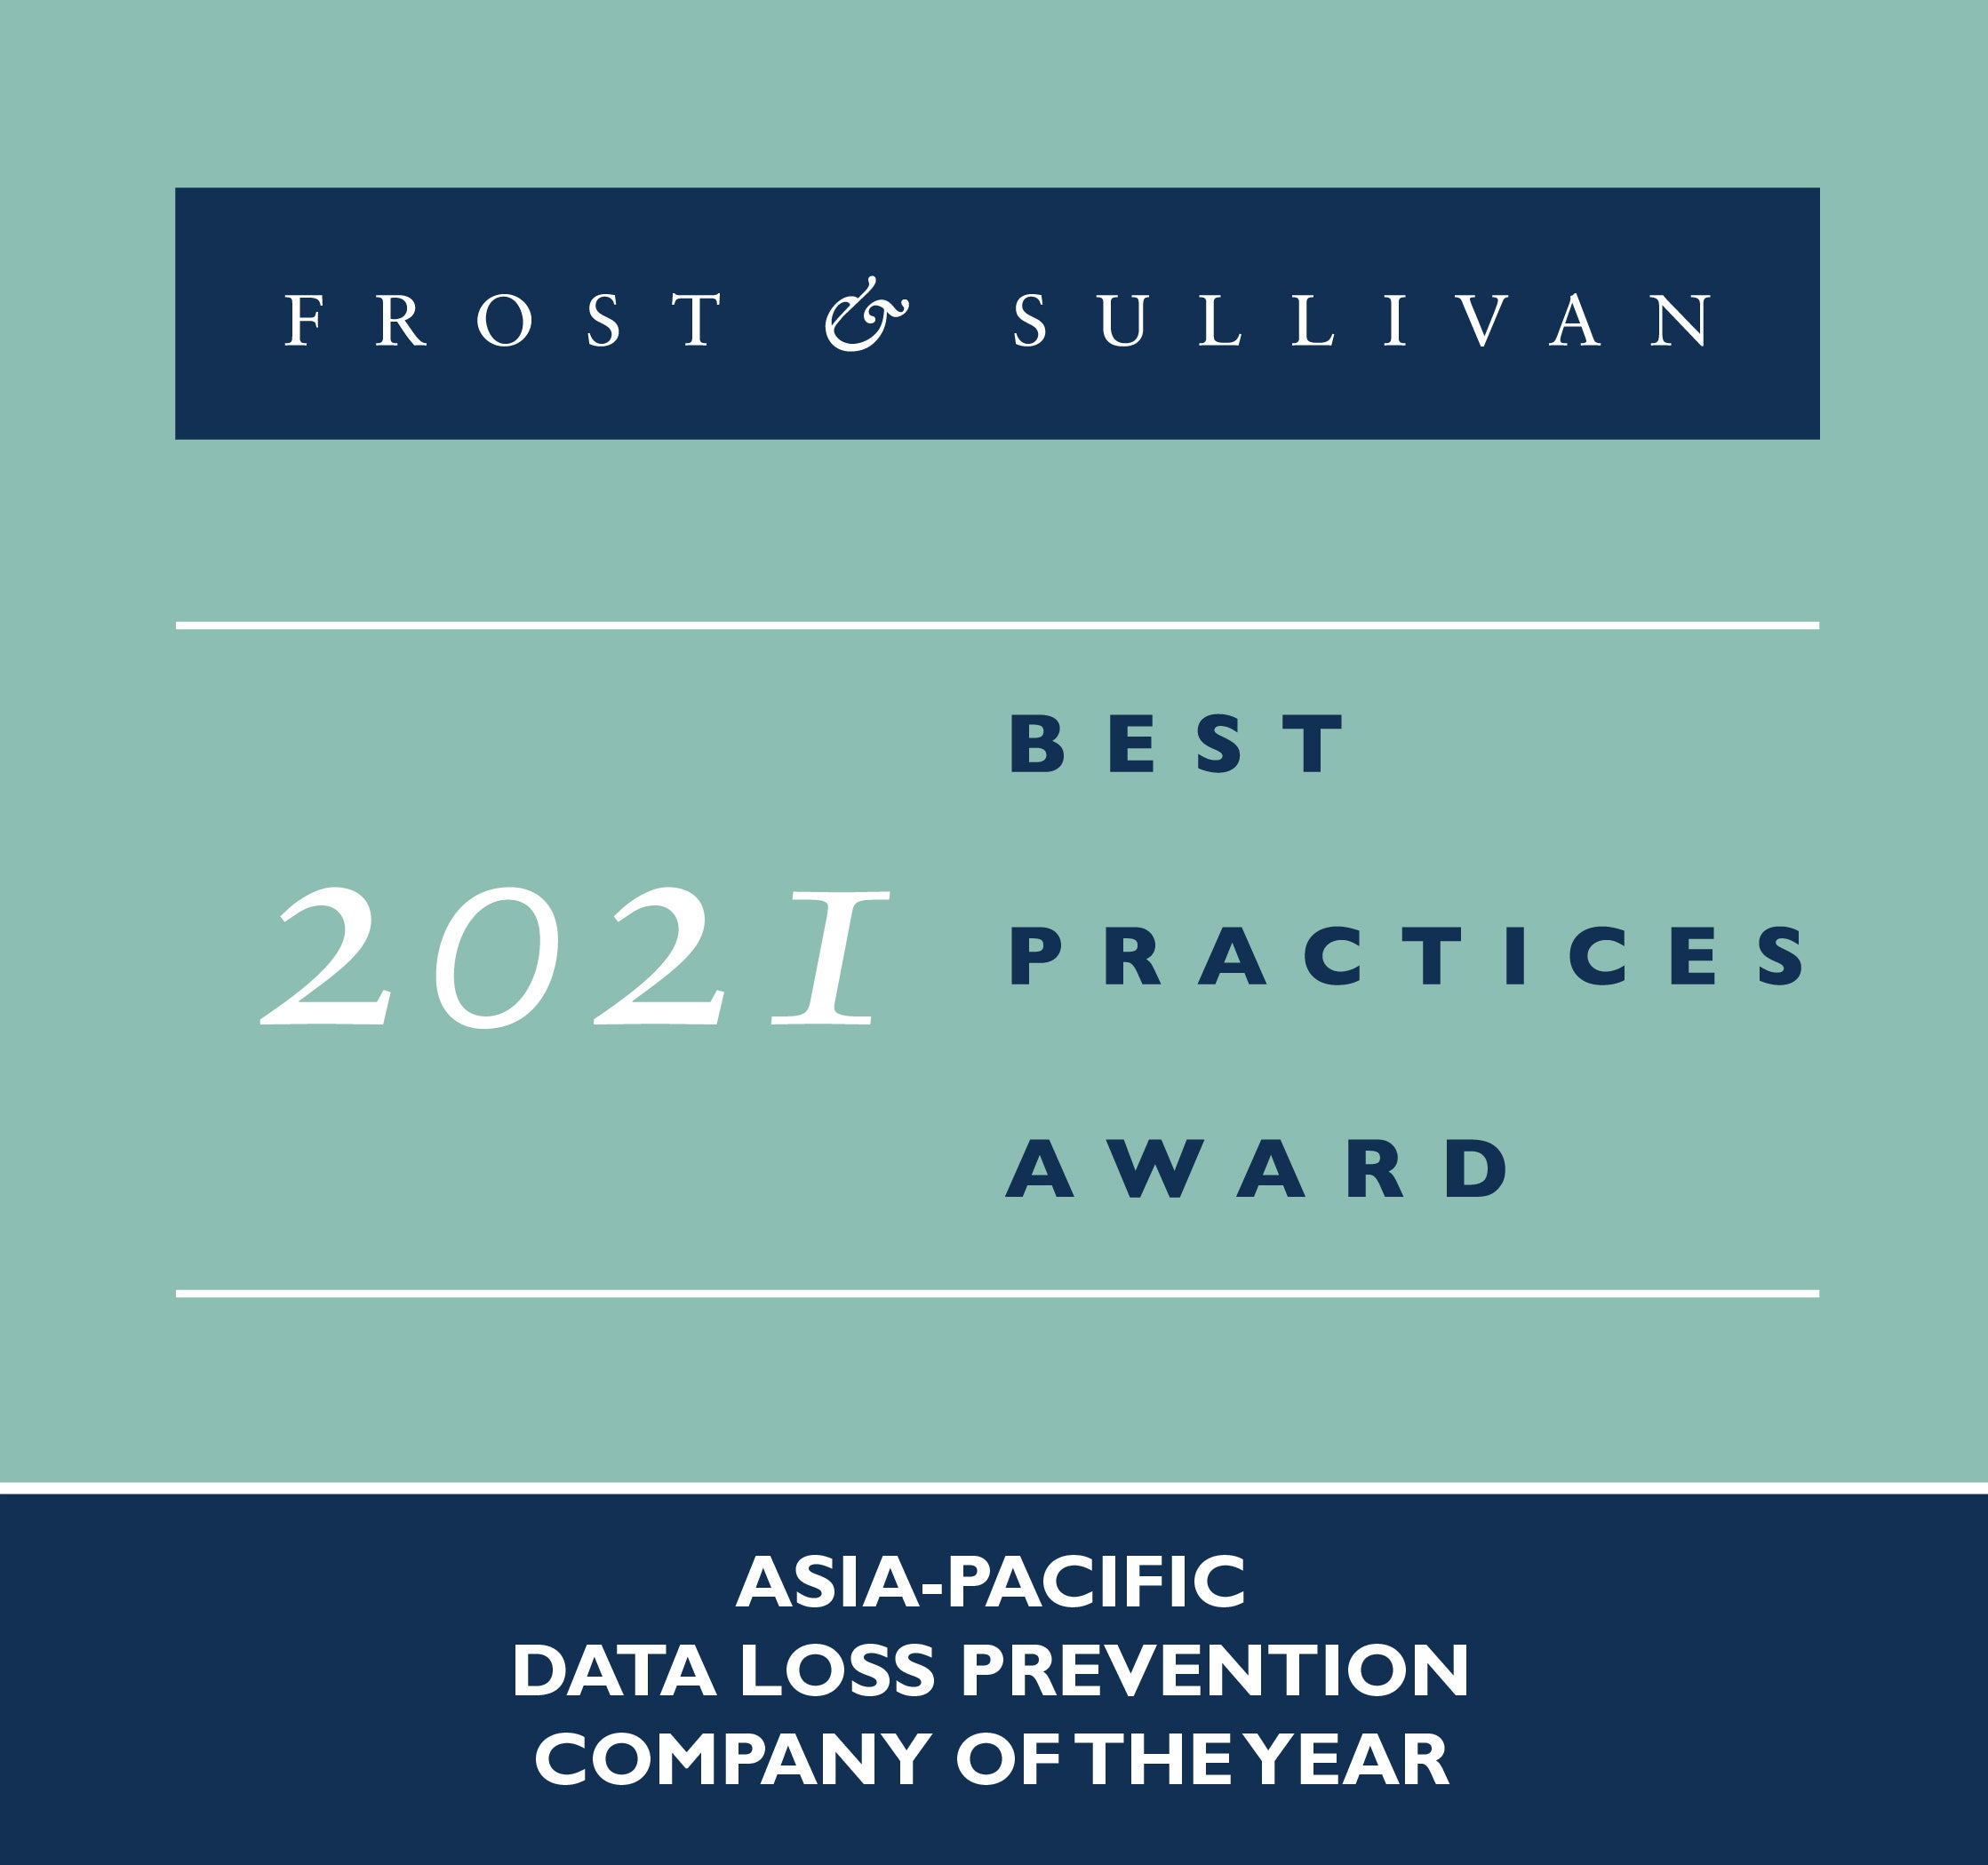 Frost & Sullivan APAC DLP Company of the Year | Forcepoint